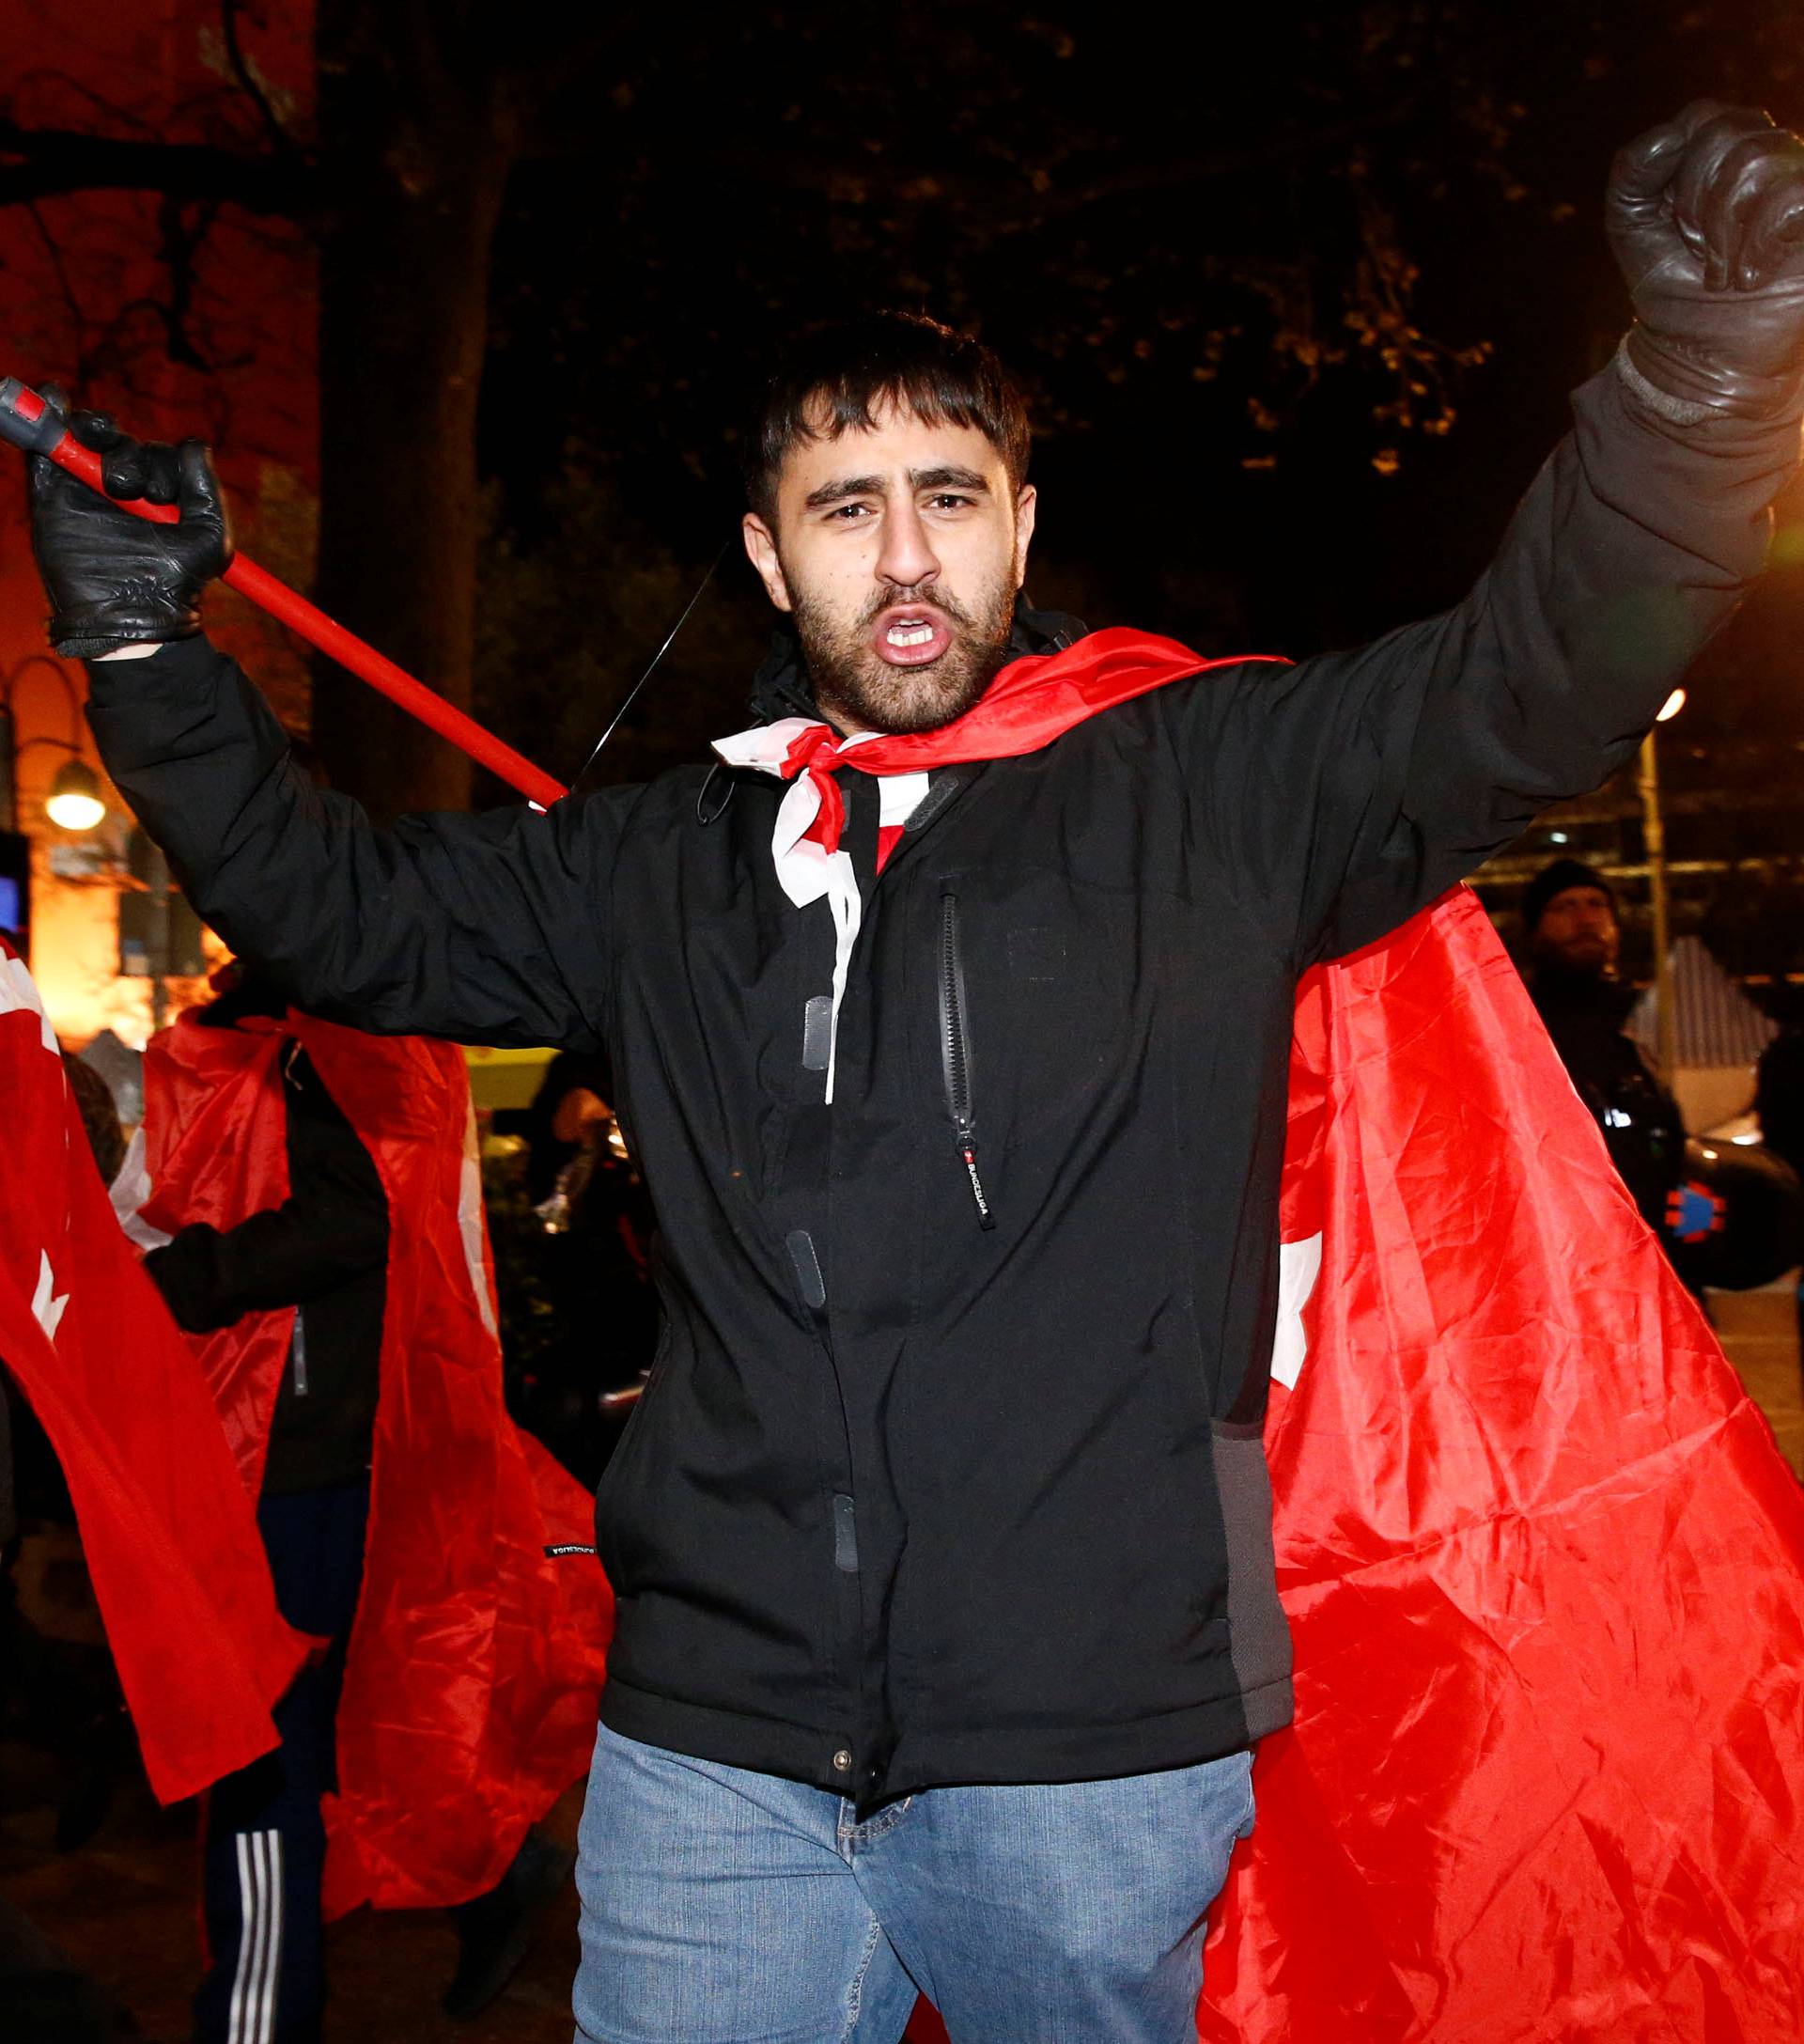 People of the Turkish community living in Germany celebrate on Kurfuerstendamm boulevard on the outcome of Turkey's referendum on the constitution, in Berlin